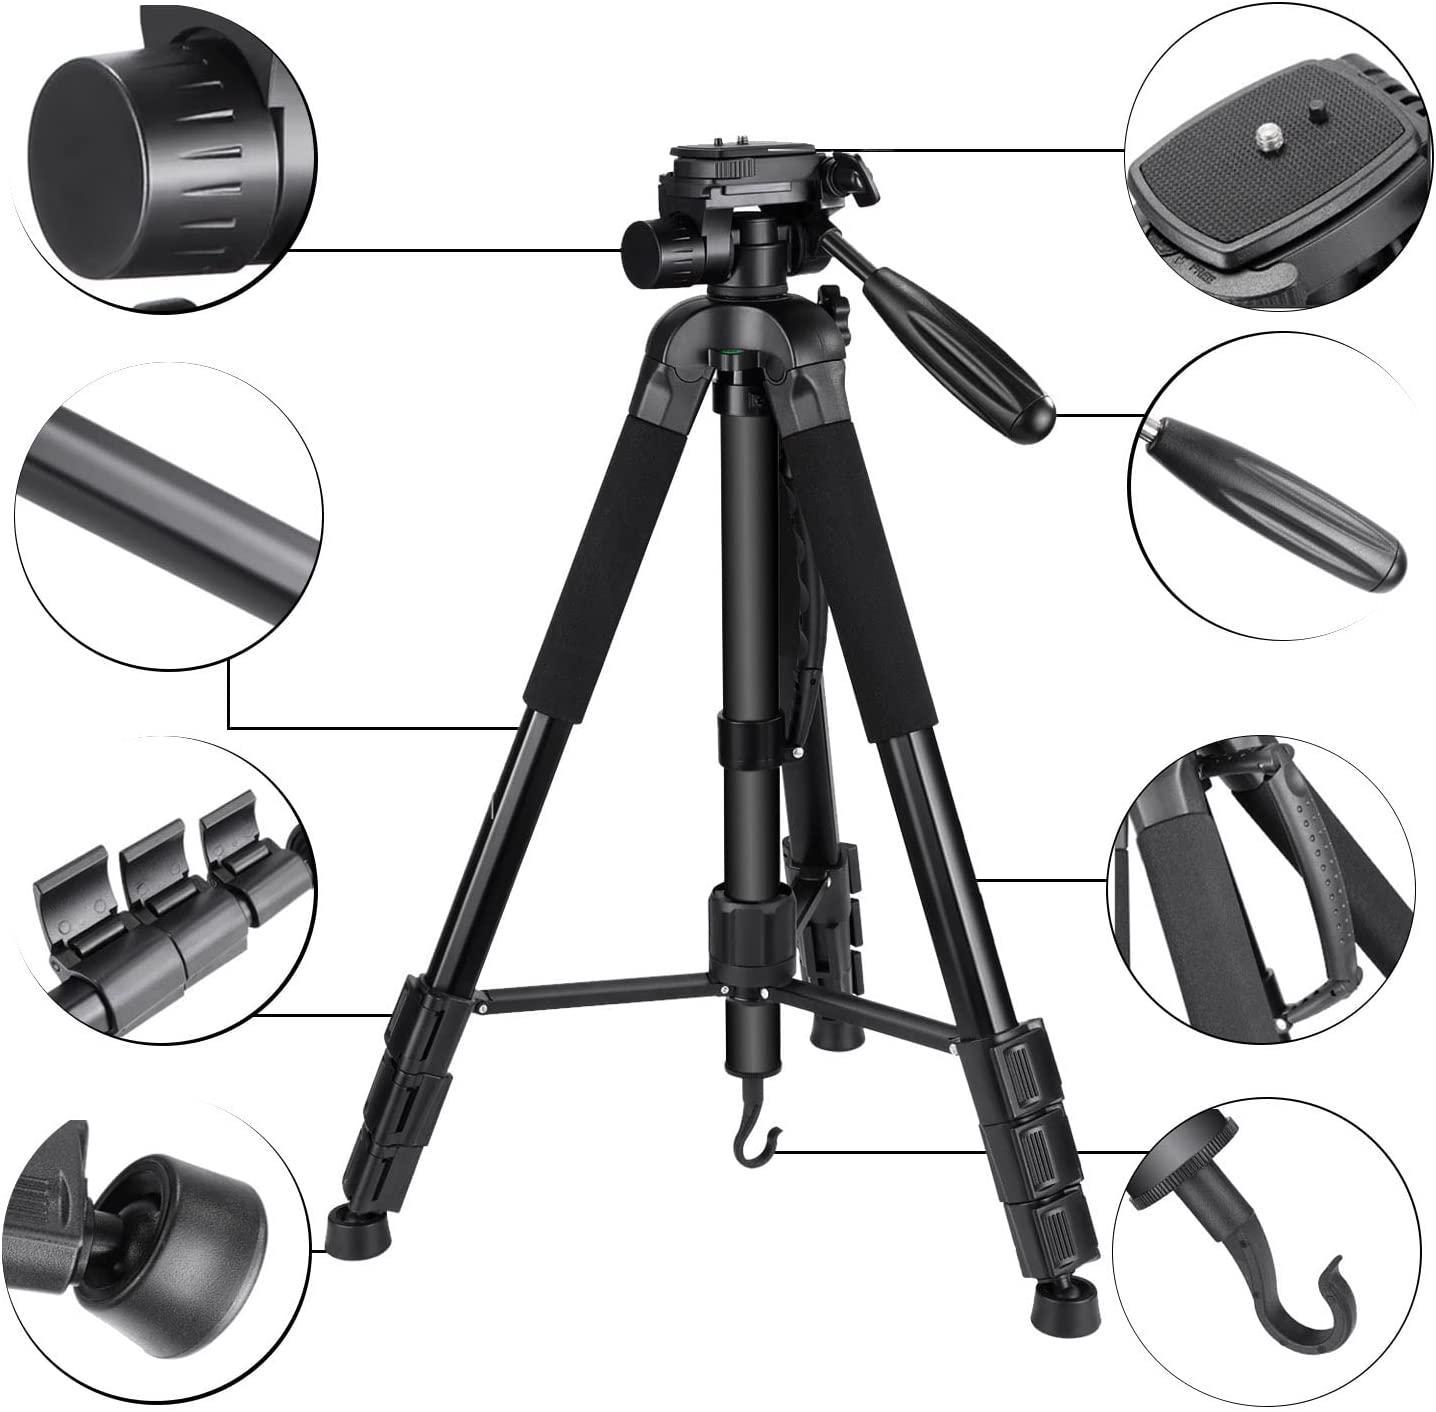 COOPIC T800 2 in 1 Tripod and Monopod 69.5/176.5cm Lightweight Portable Tripod for SLR/DSLR Cameras with tripod bag (Max Load 4Kg)